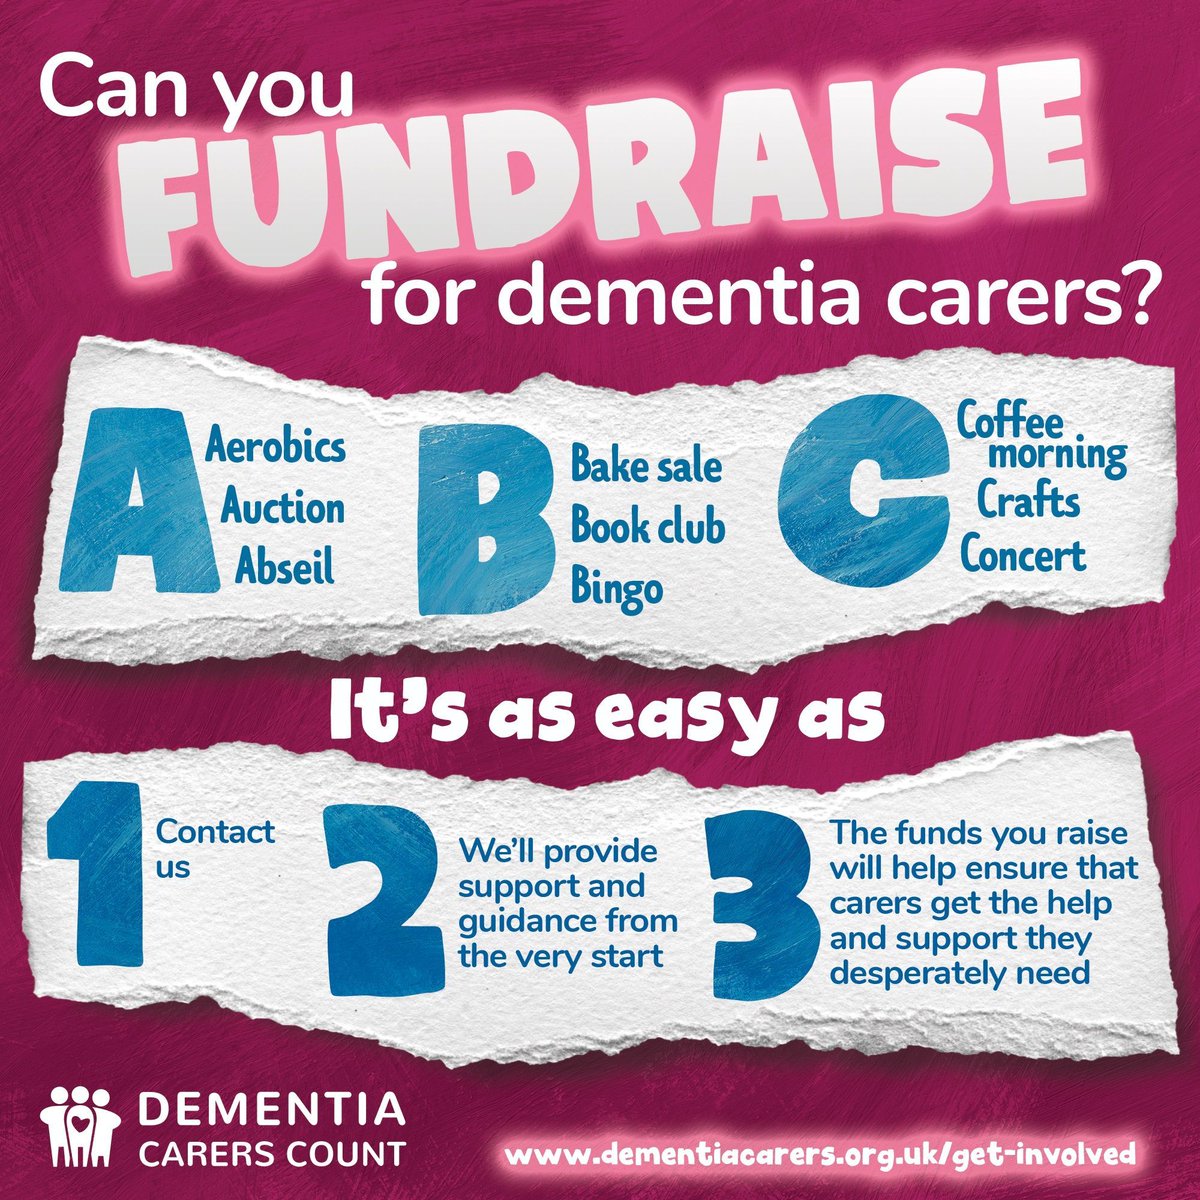 Every day, our team of health and care professionals work directly with carers and organisations across the UK to support families living with #dementia; but we need your help. Contact our friendly #fundraising team to see how you can help: buff.ly/3SszssP #CarerSupport